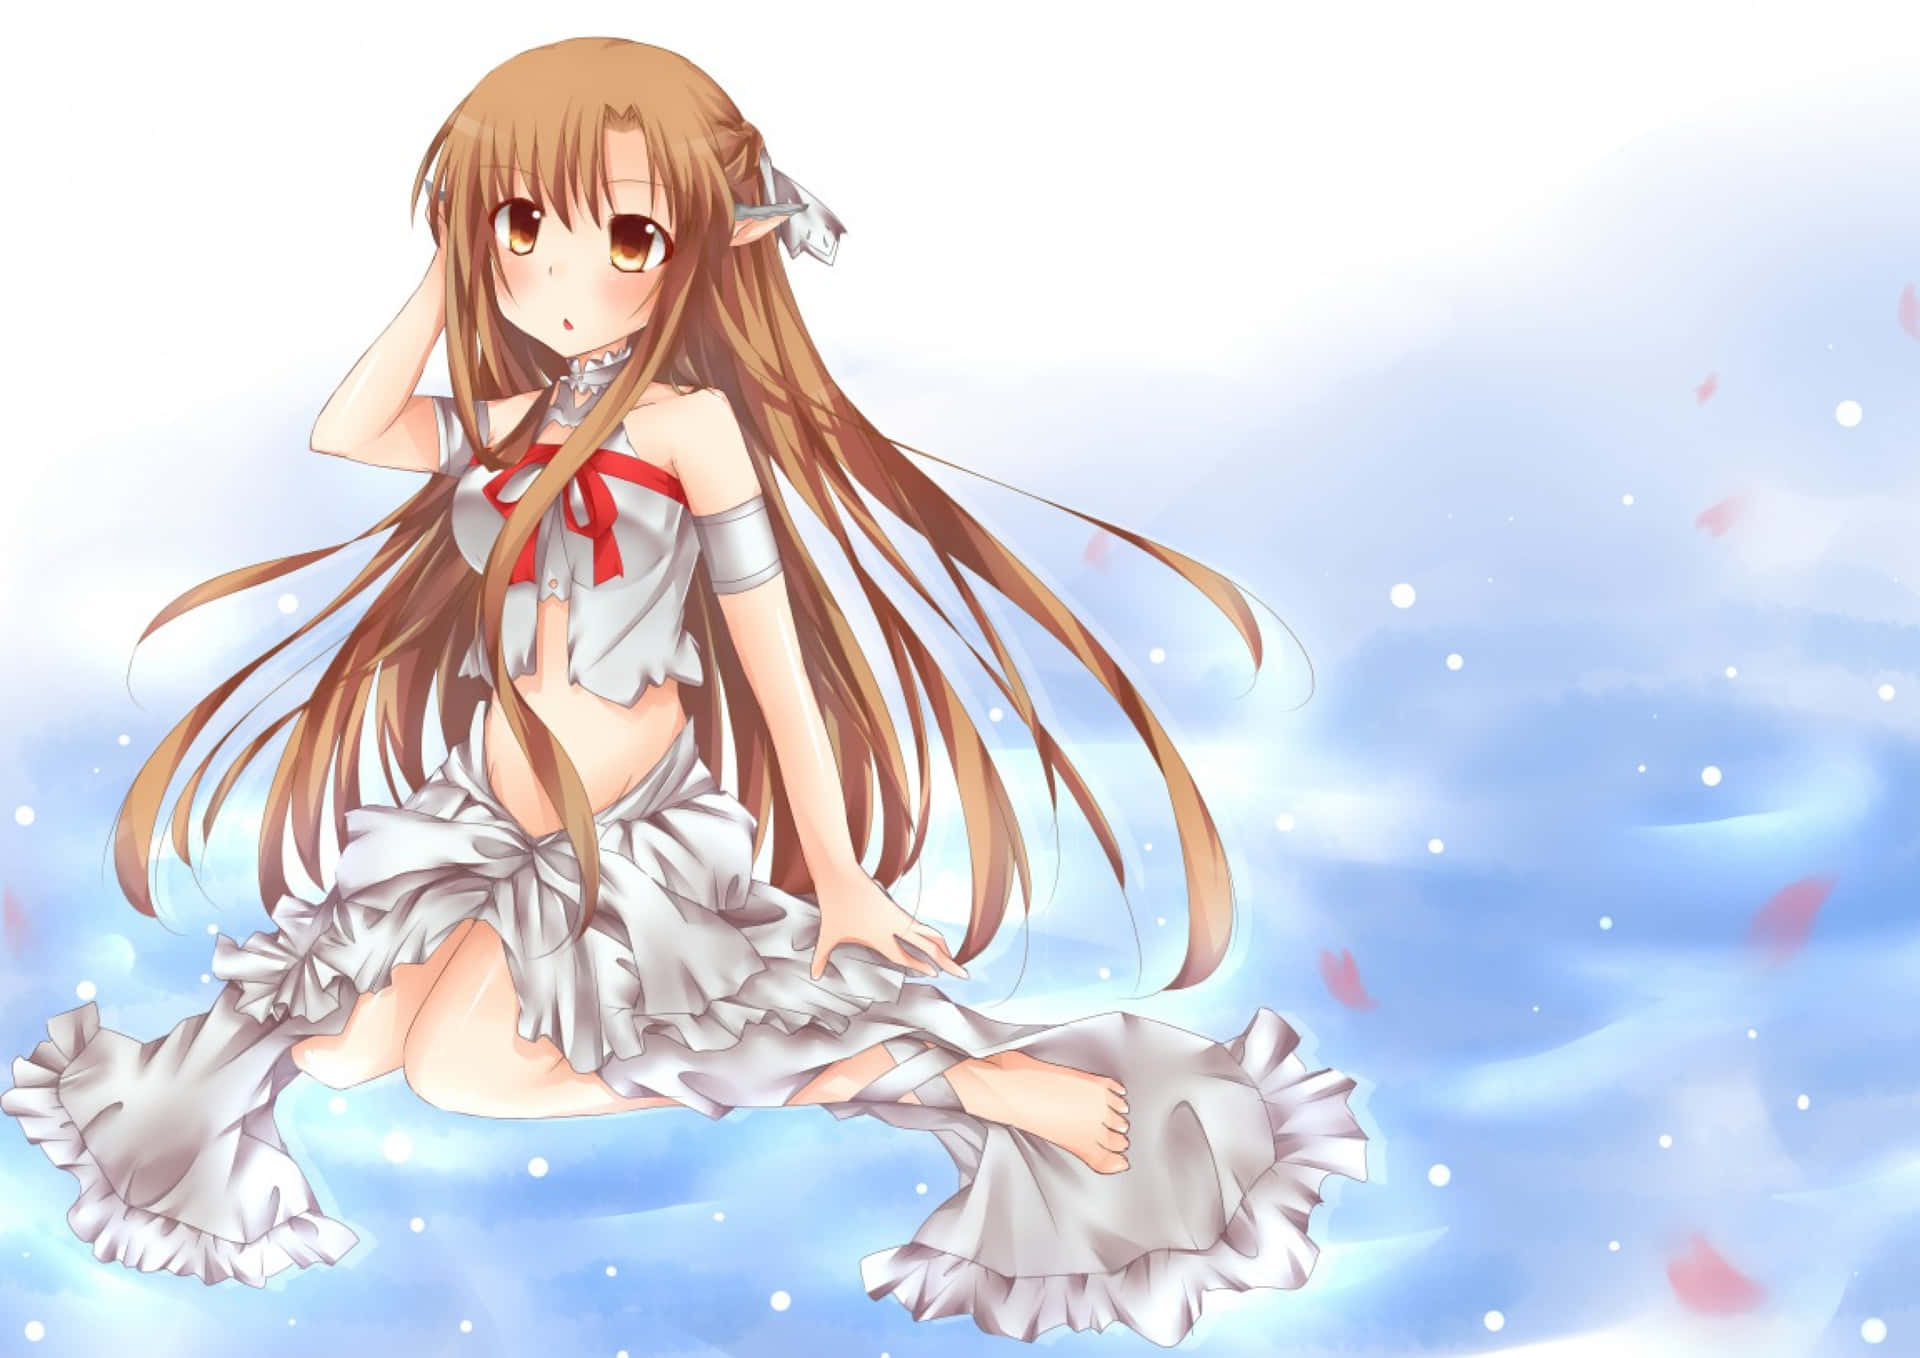 Blushing Asuna From Sword Art Online Background